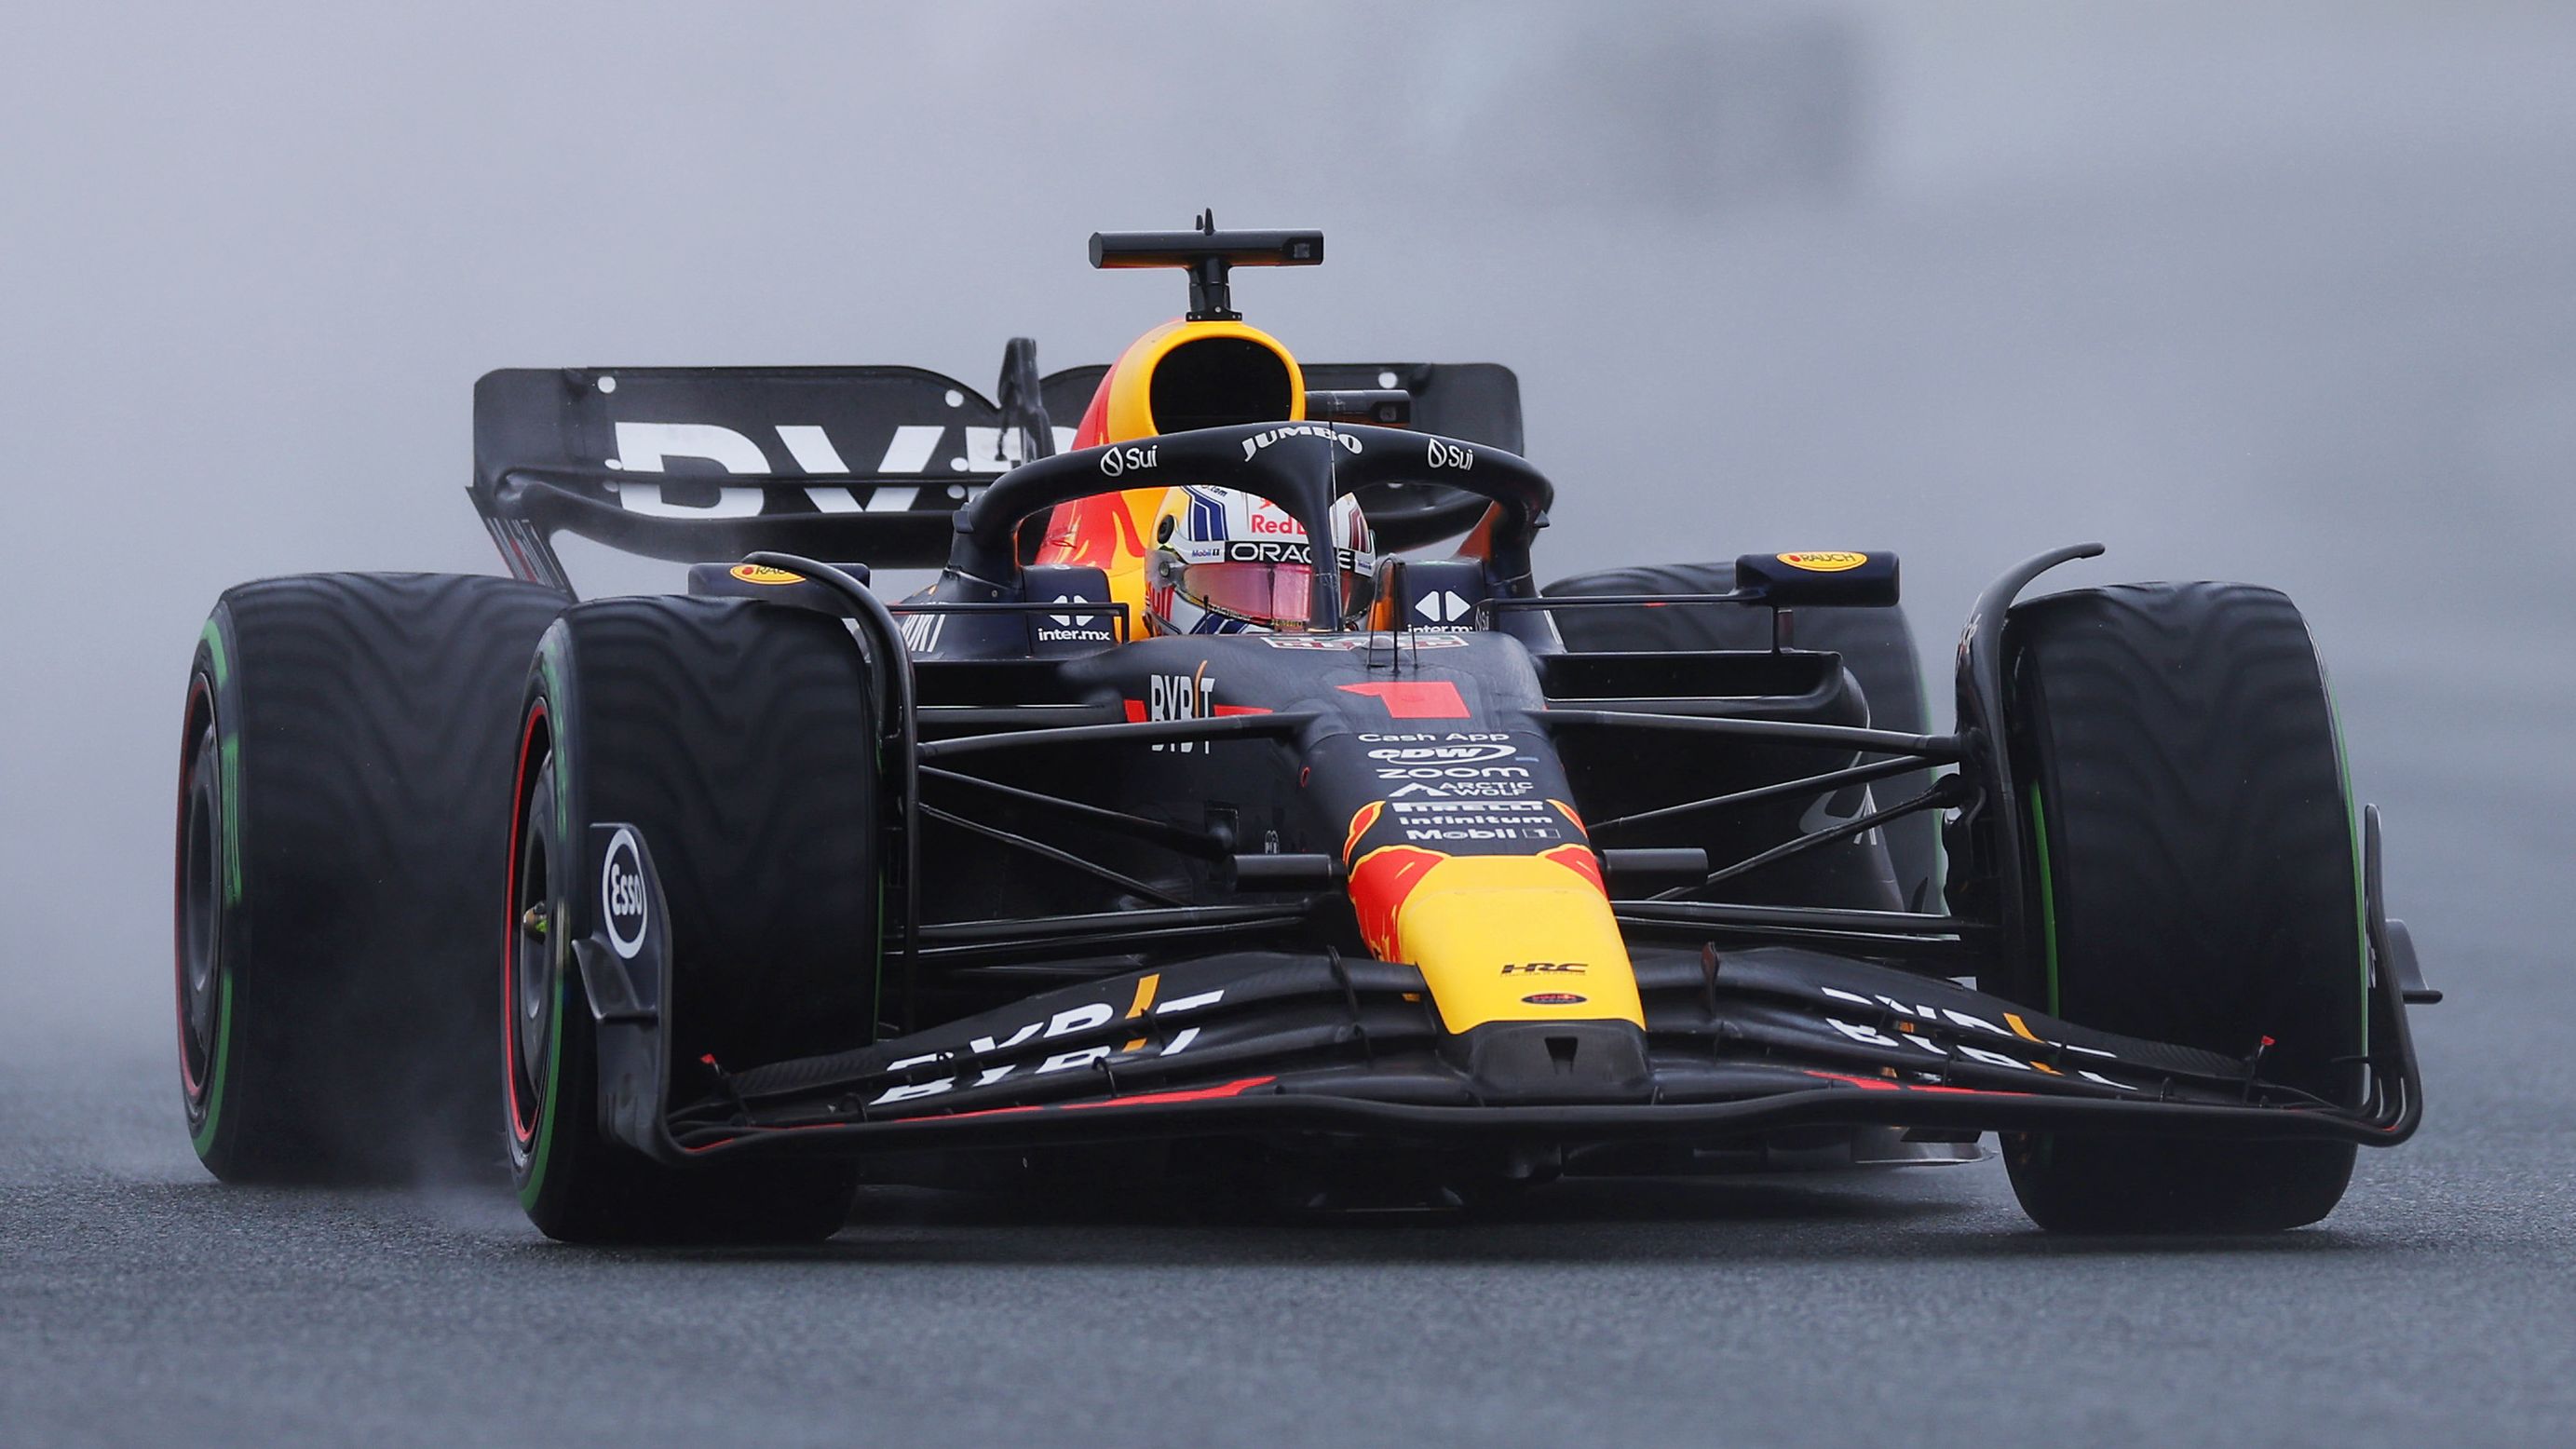 Max Verstappen survives late race weather chaos to claim record-equaling ninth straight F1 victory